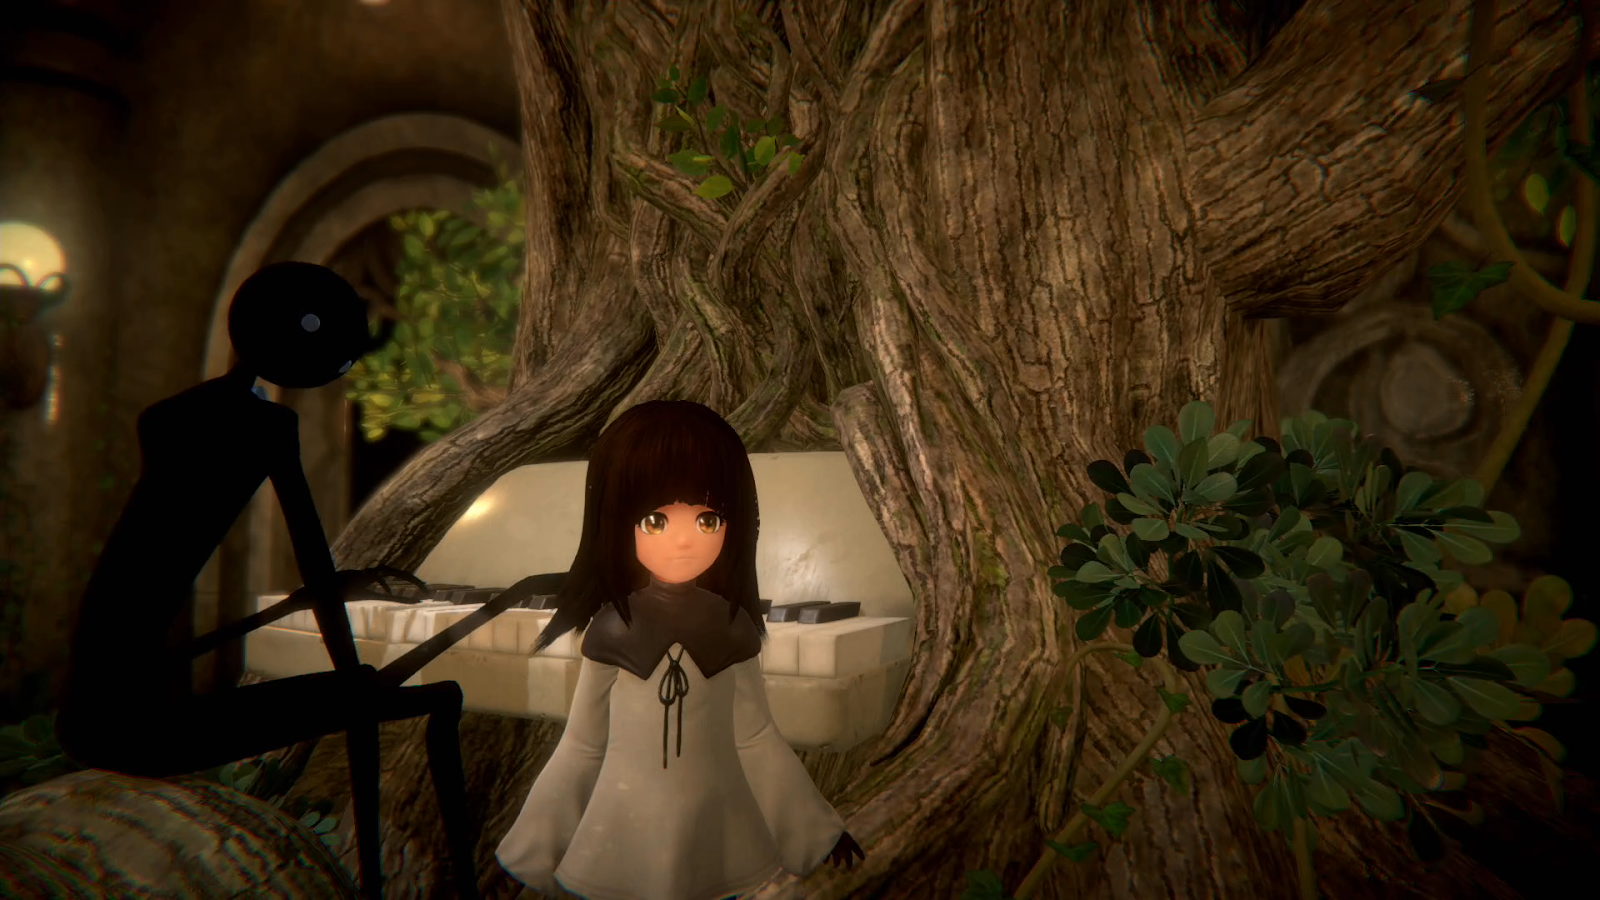 Melancholy Music Game Deemo Is More Heartbreaking In 3D